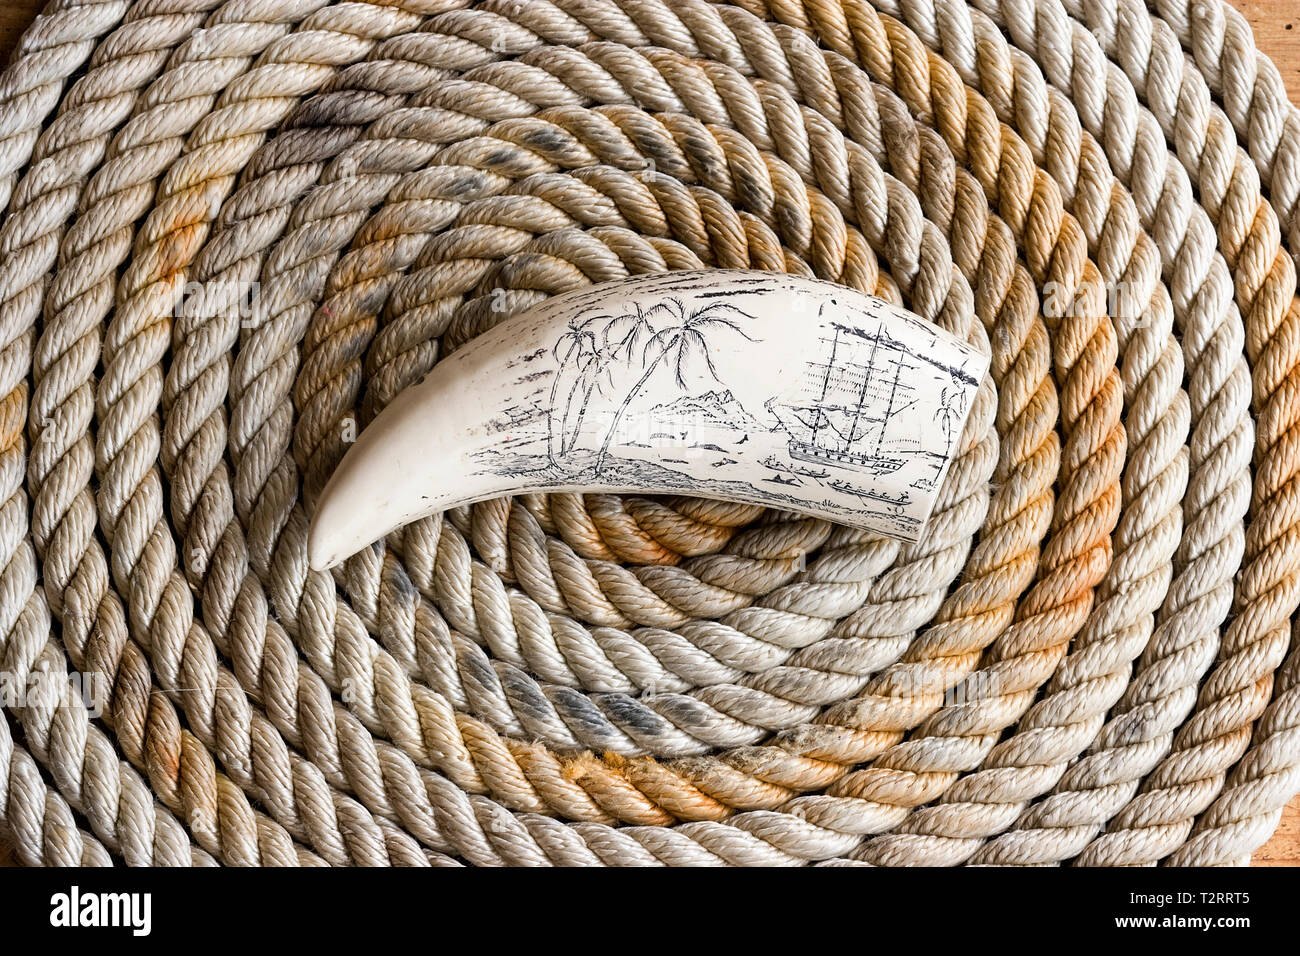 Scrimshaw carving of South Seas whaling ship on whalebone Stock Photo